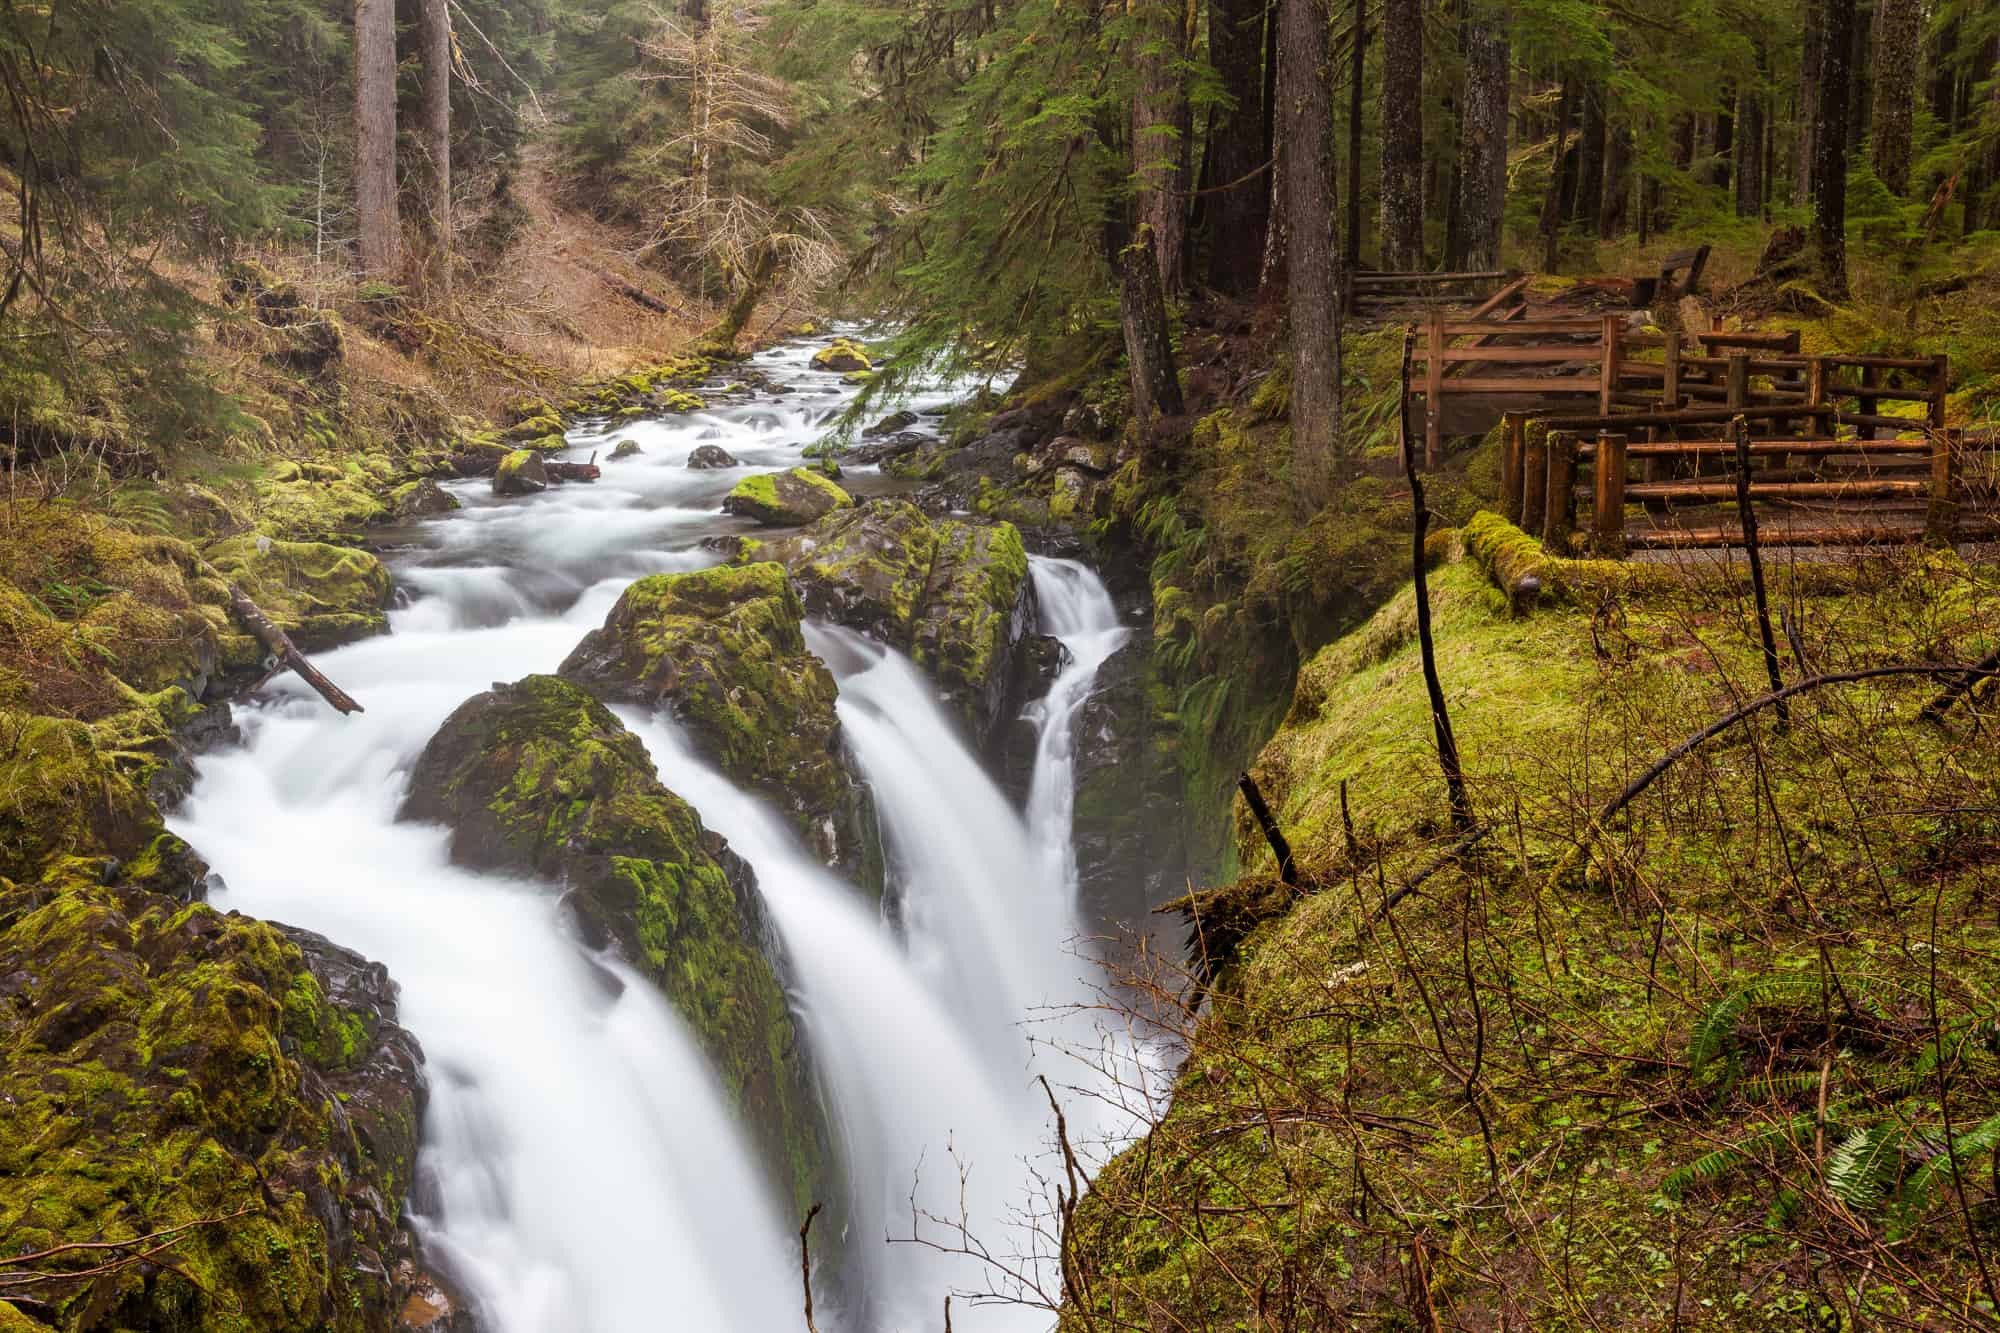 Sol Duc Falls seen with 4 waterfalls falling down the rocky cliff edge next to a viewing playform, sol duc falls is just one of the waterfalls that is a must-see for olympic national park photography